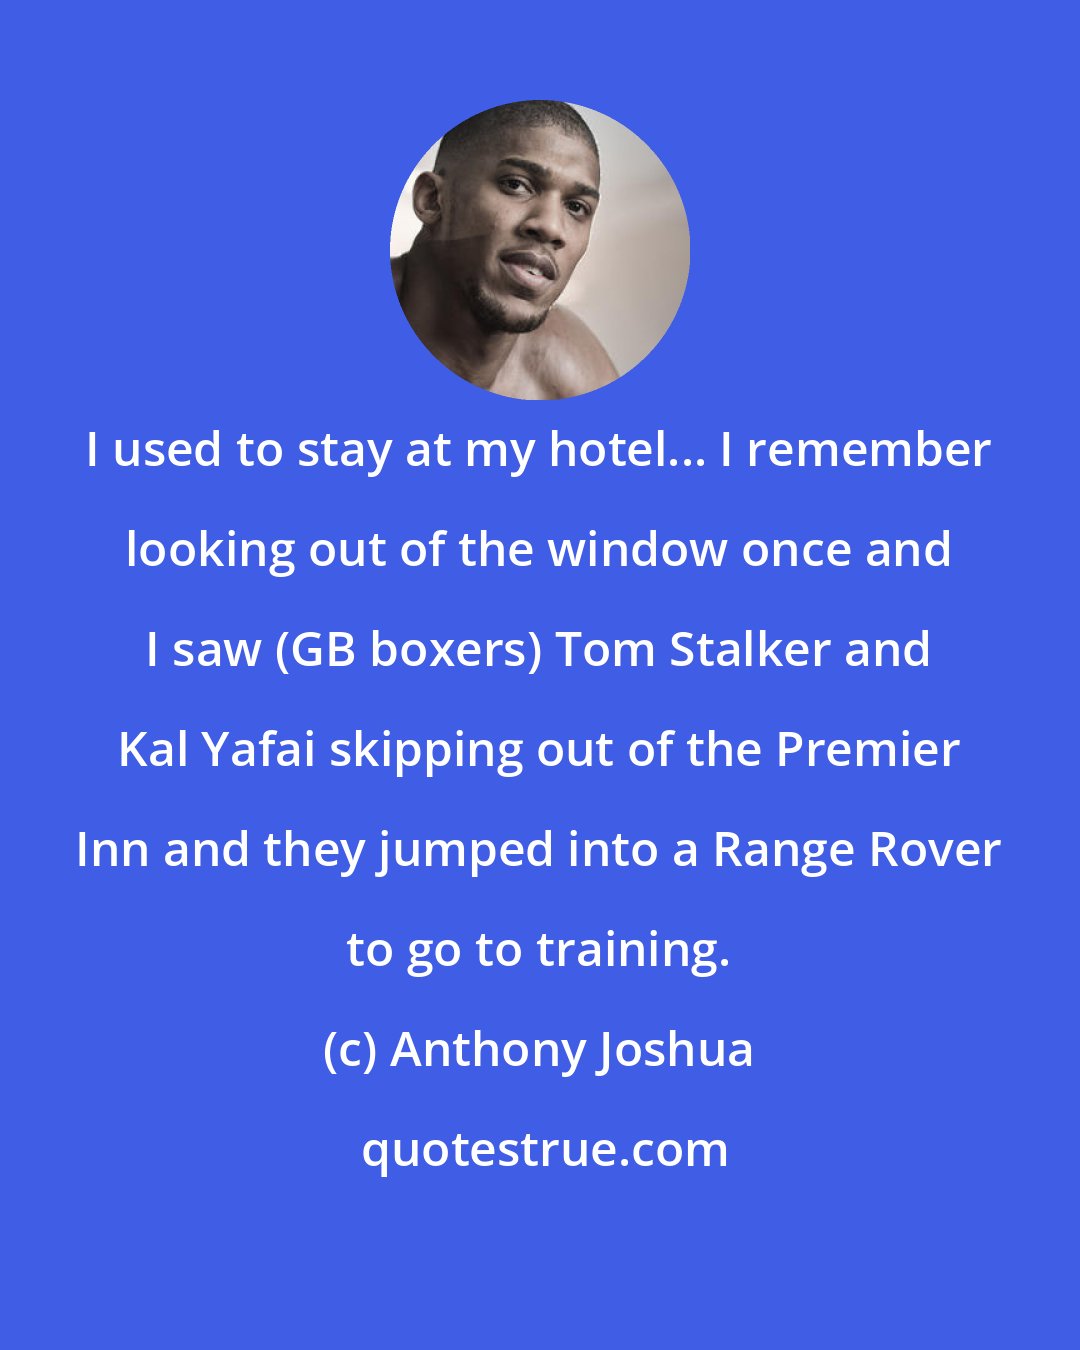 Anthony Joshua: I used to stay at my hotel... I remember looking out of the window once and I saw (GB boxers) Tom Stalker and Kal Yafai skipping out of the Premier Inn and they jumped into a Range Rover to go to training.